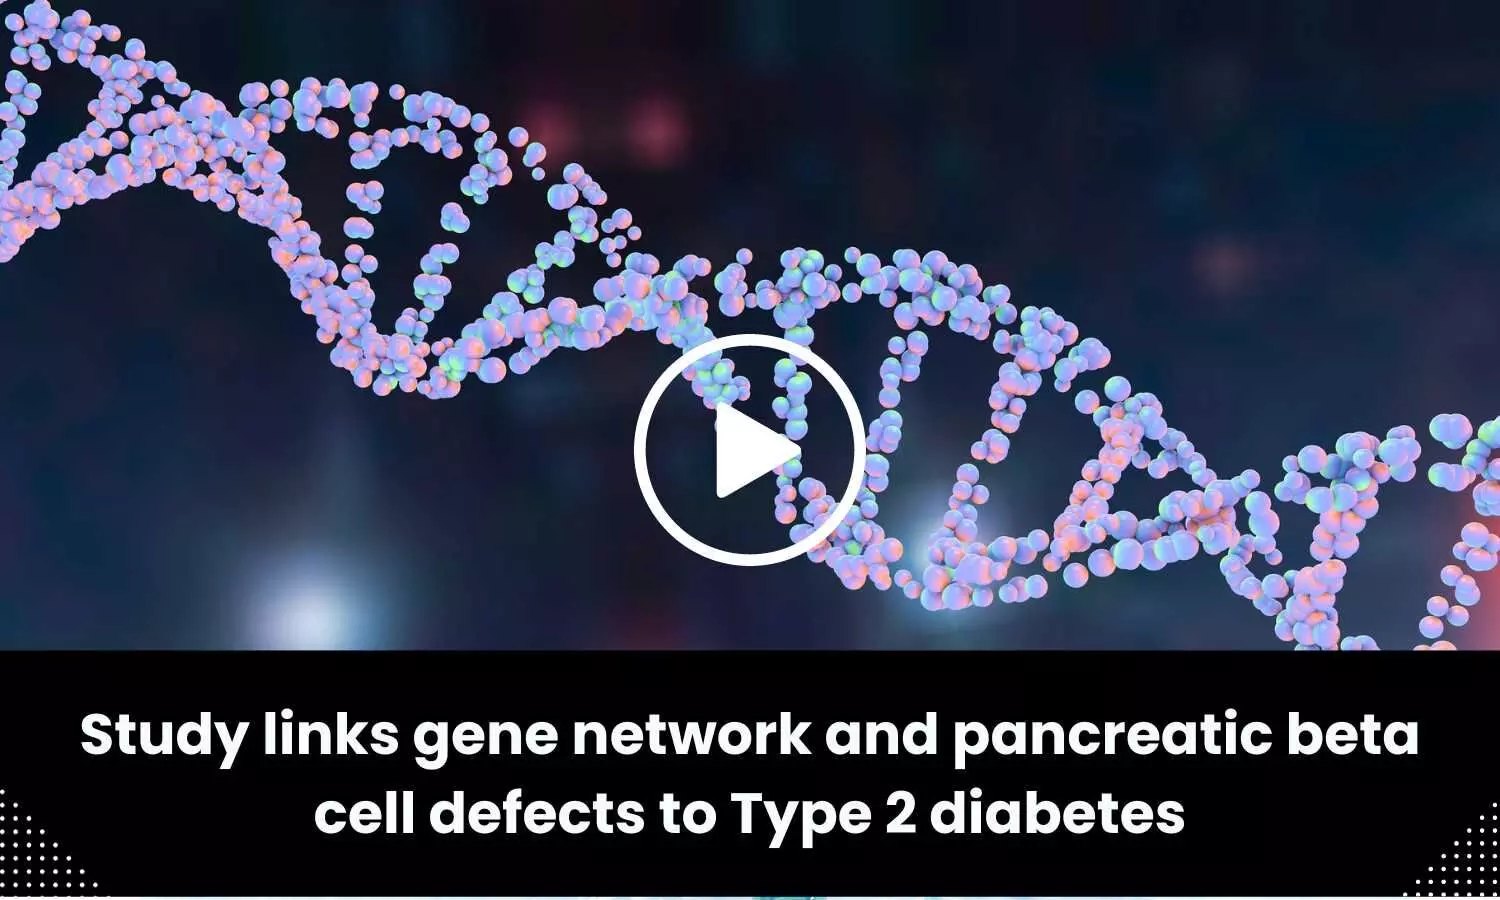 Study links gene network and pancreatic beta cell defects to Type 2 diabetes